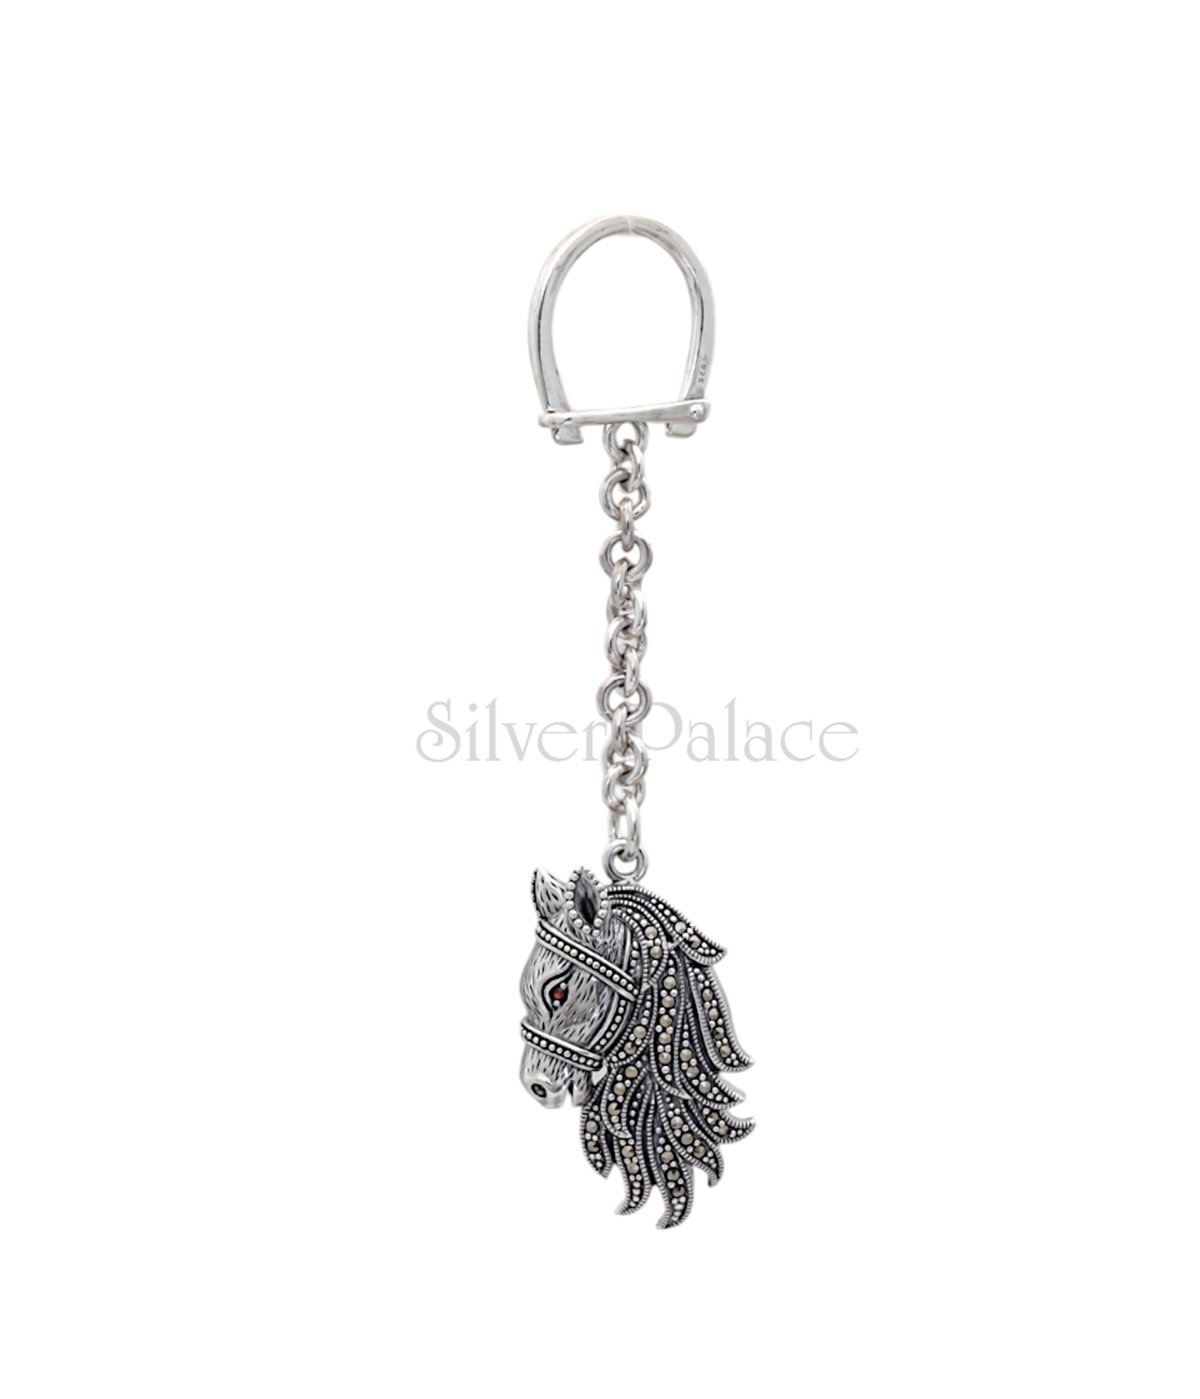 92.5 PURE SILVER VINTAGE HORSE HEAD KEYCHAIN FOR MEN